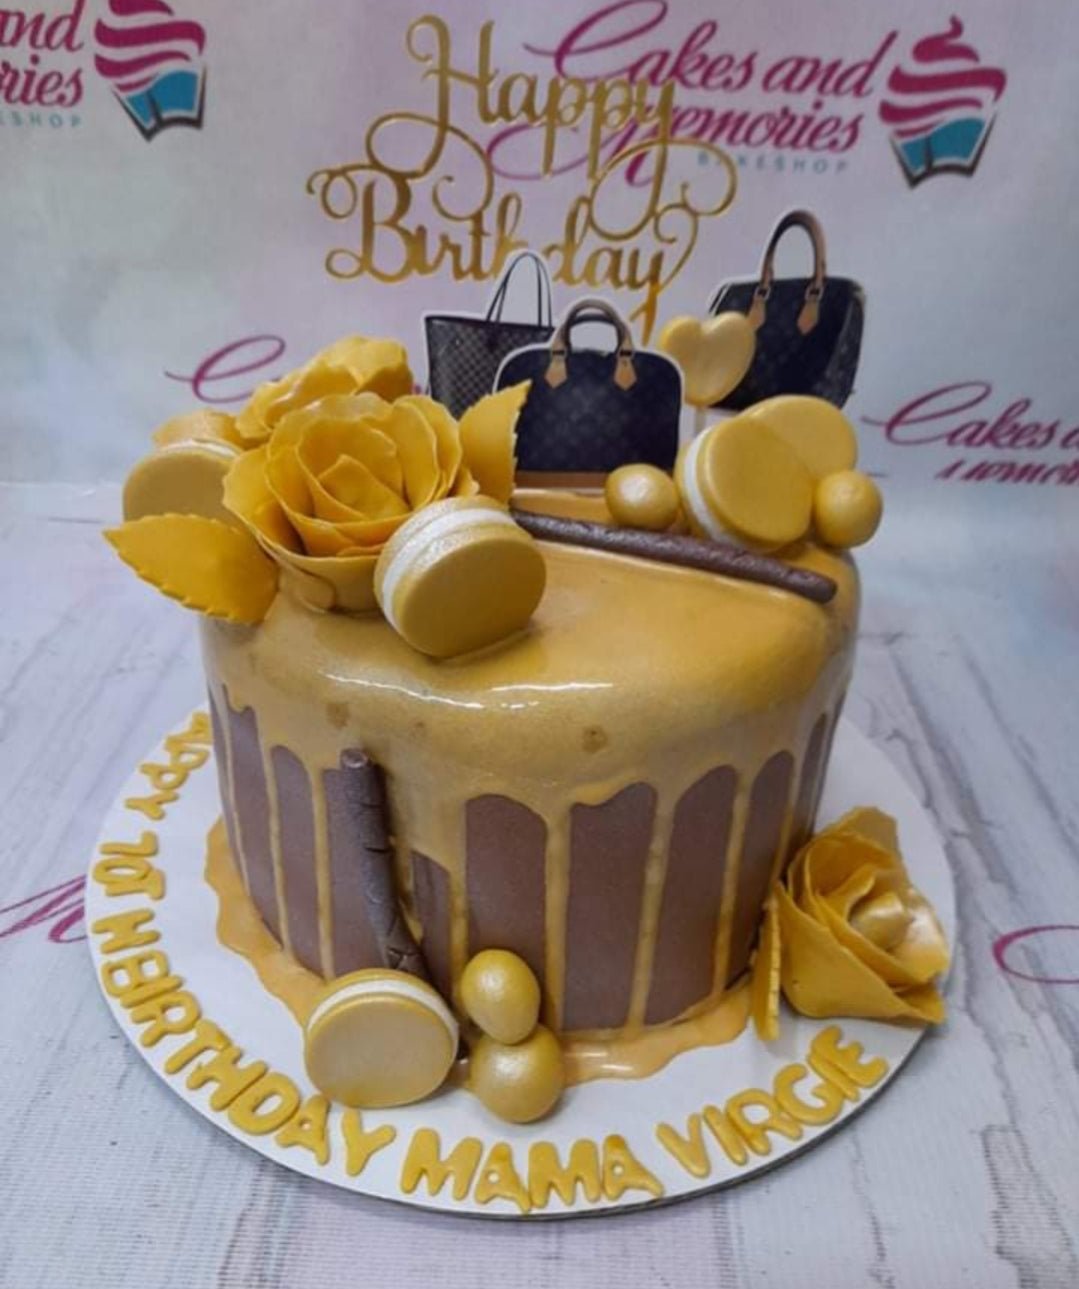 Bags & Shoes Cake - 1107 – Cakes and Memories Bakeshop